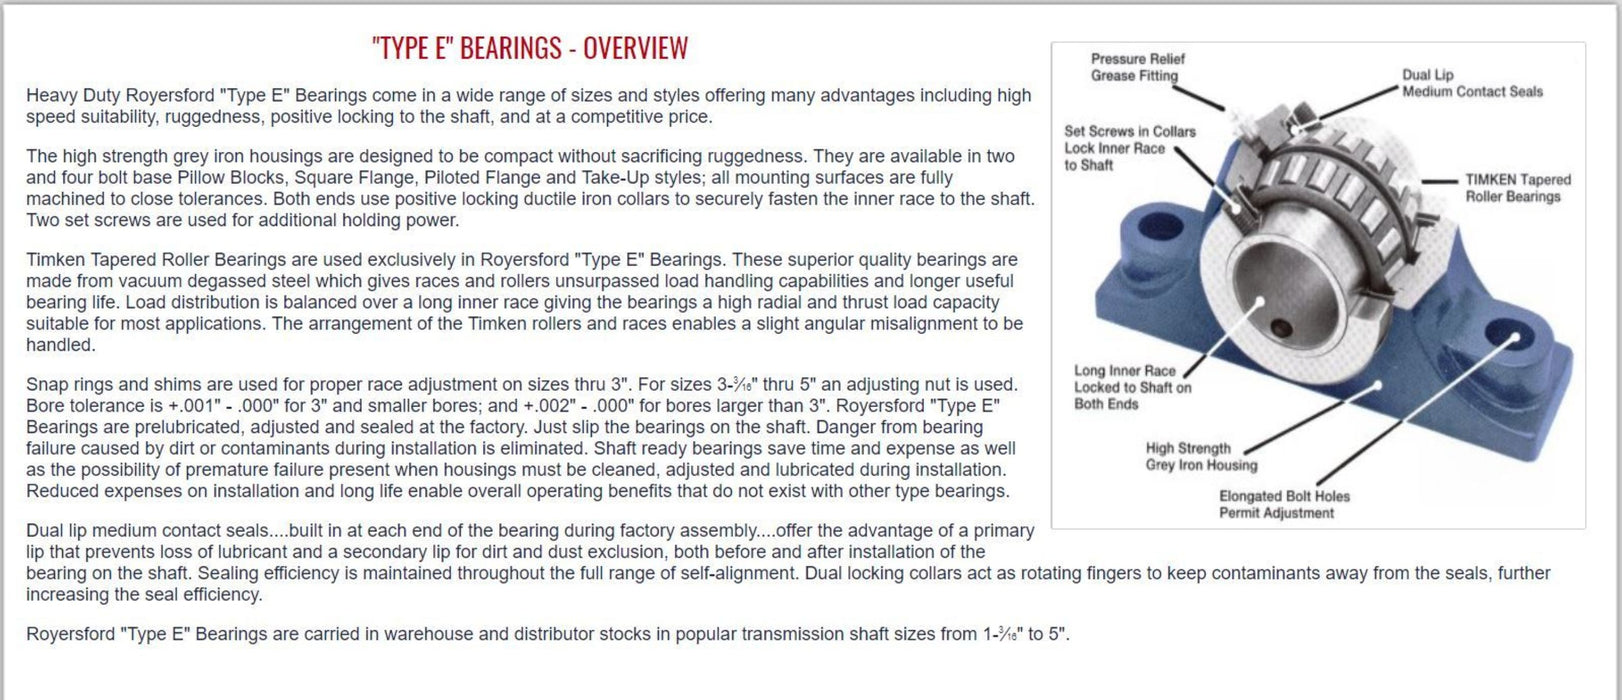 20-05-0112, Royersford Type E 4 Bolt Square Flange Bearing, 1-3/4" with Timken Tapered Roller Bearings